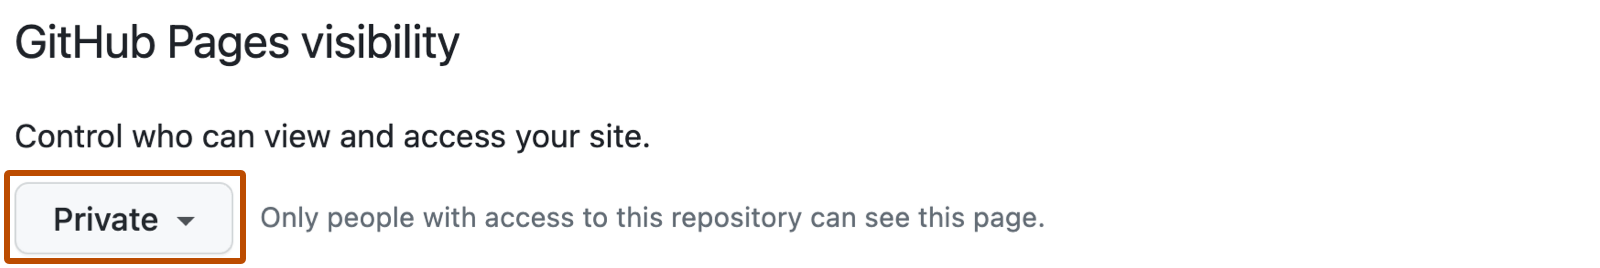 Screenshot of the visibility options for GitHub Pages